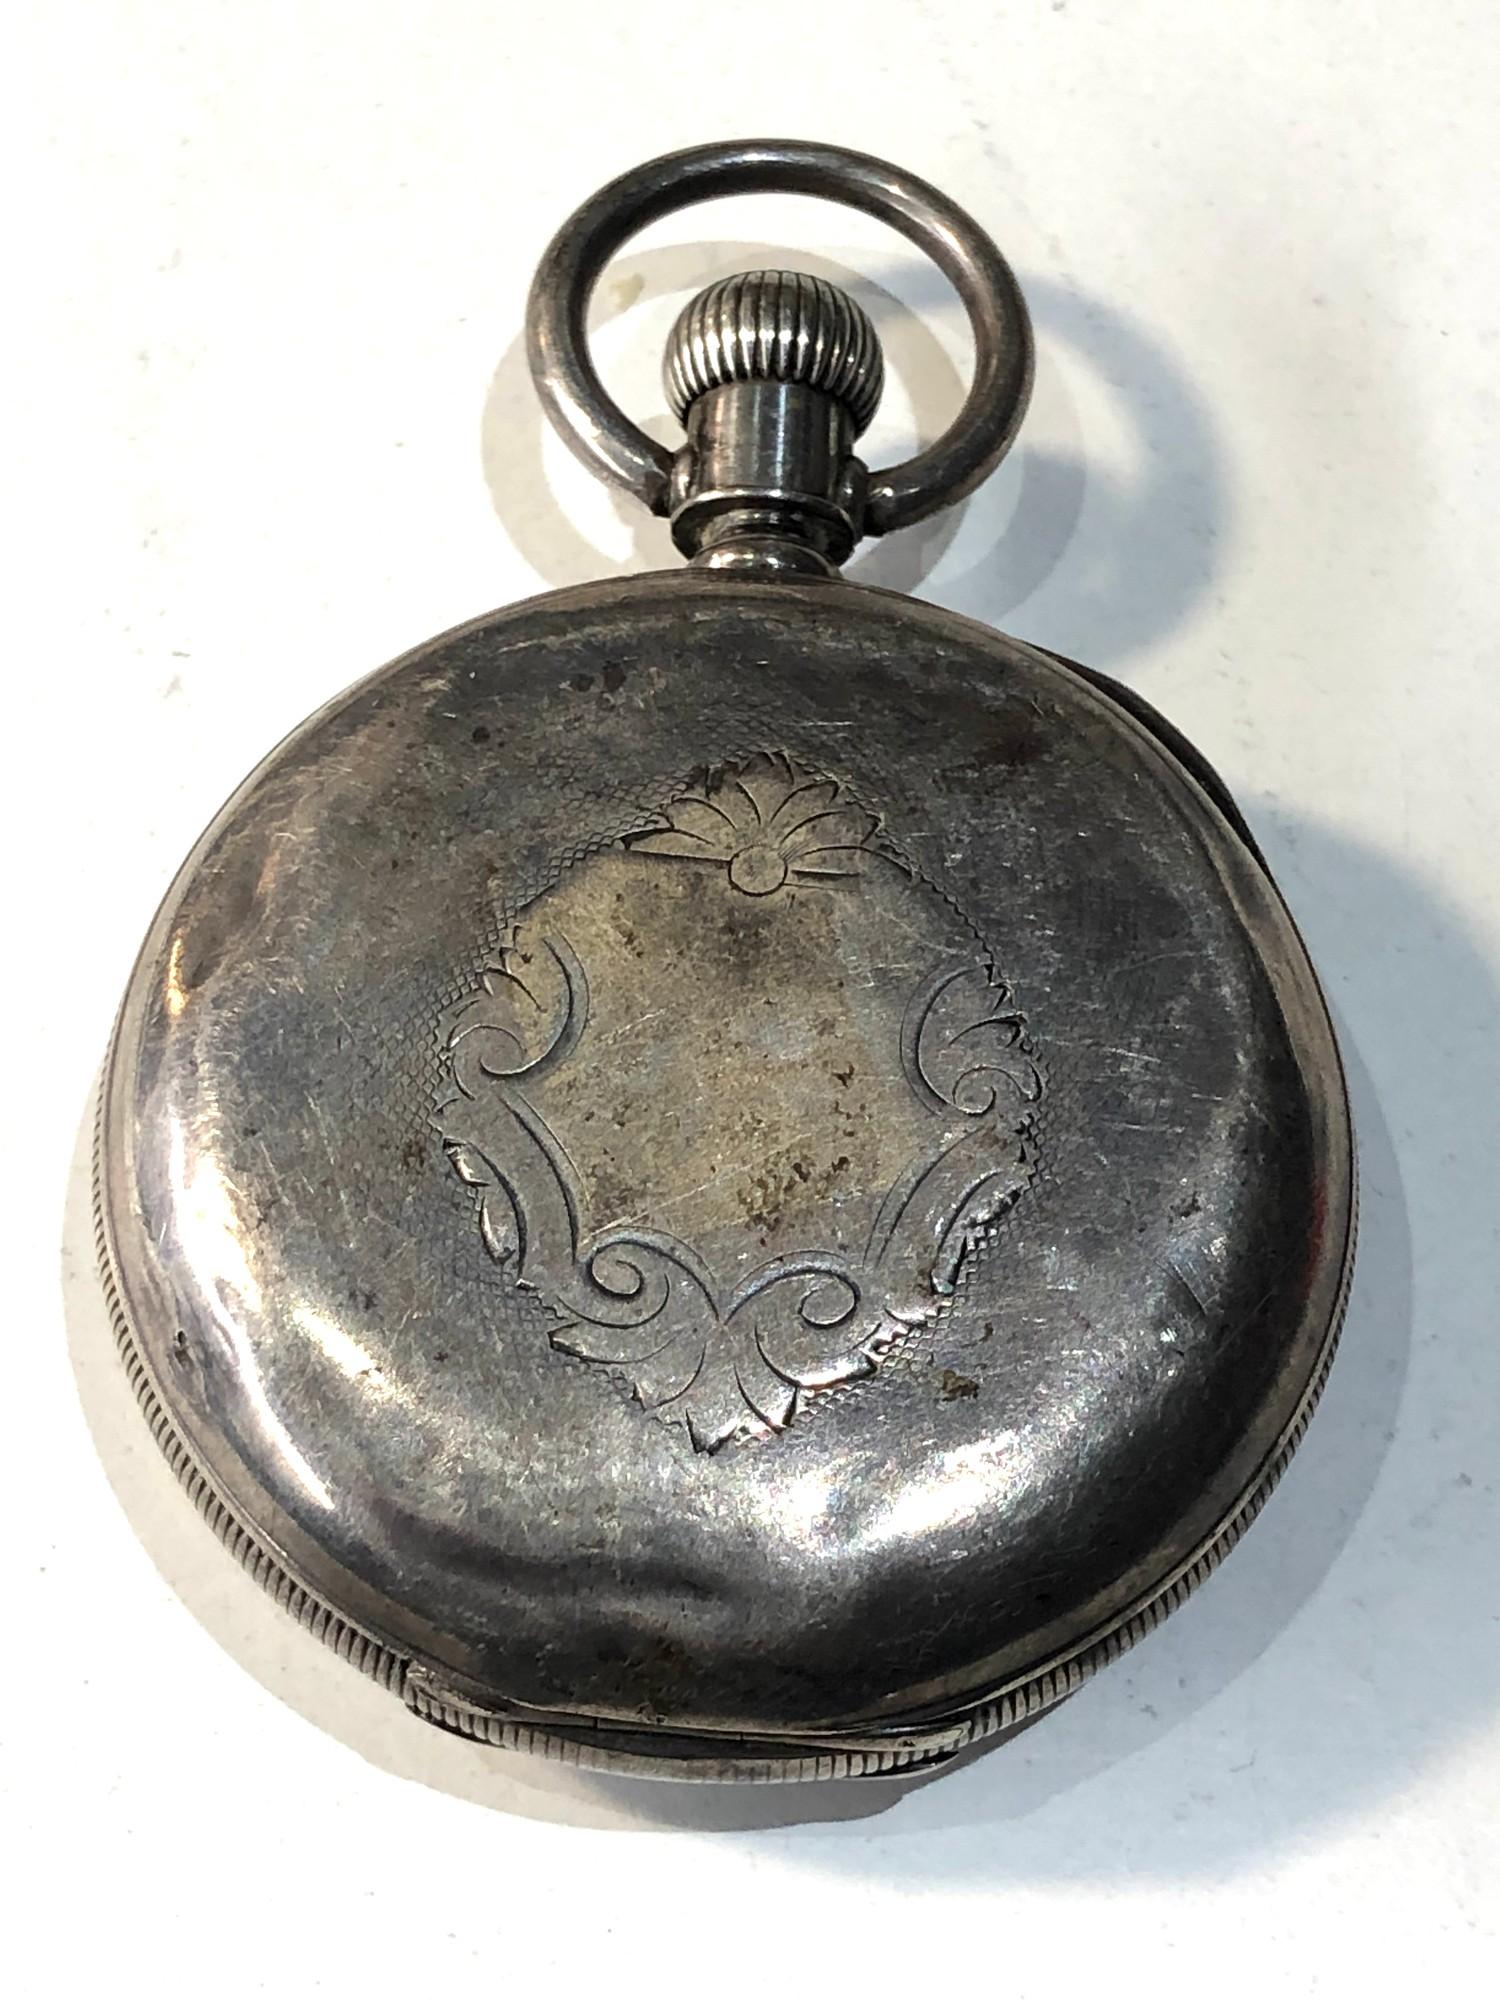 Antique silver cased Am watch Co waltham pocket watch balance will spin does not tick keeps - Image 2 of 5